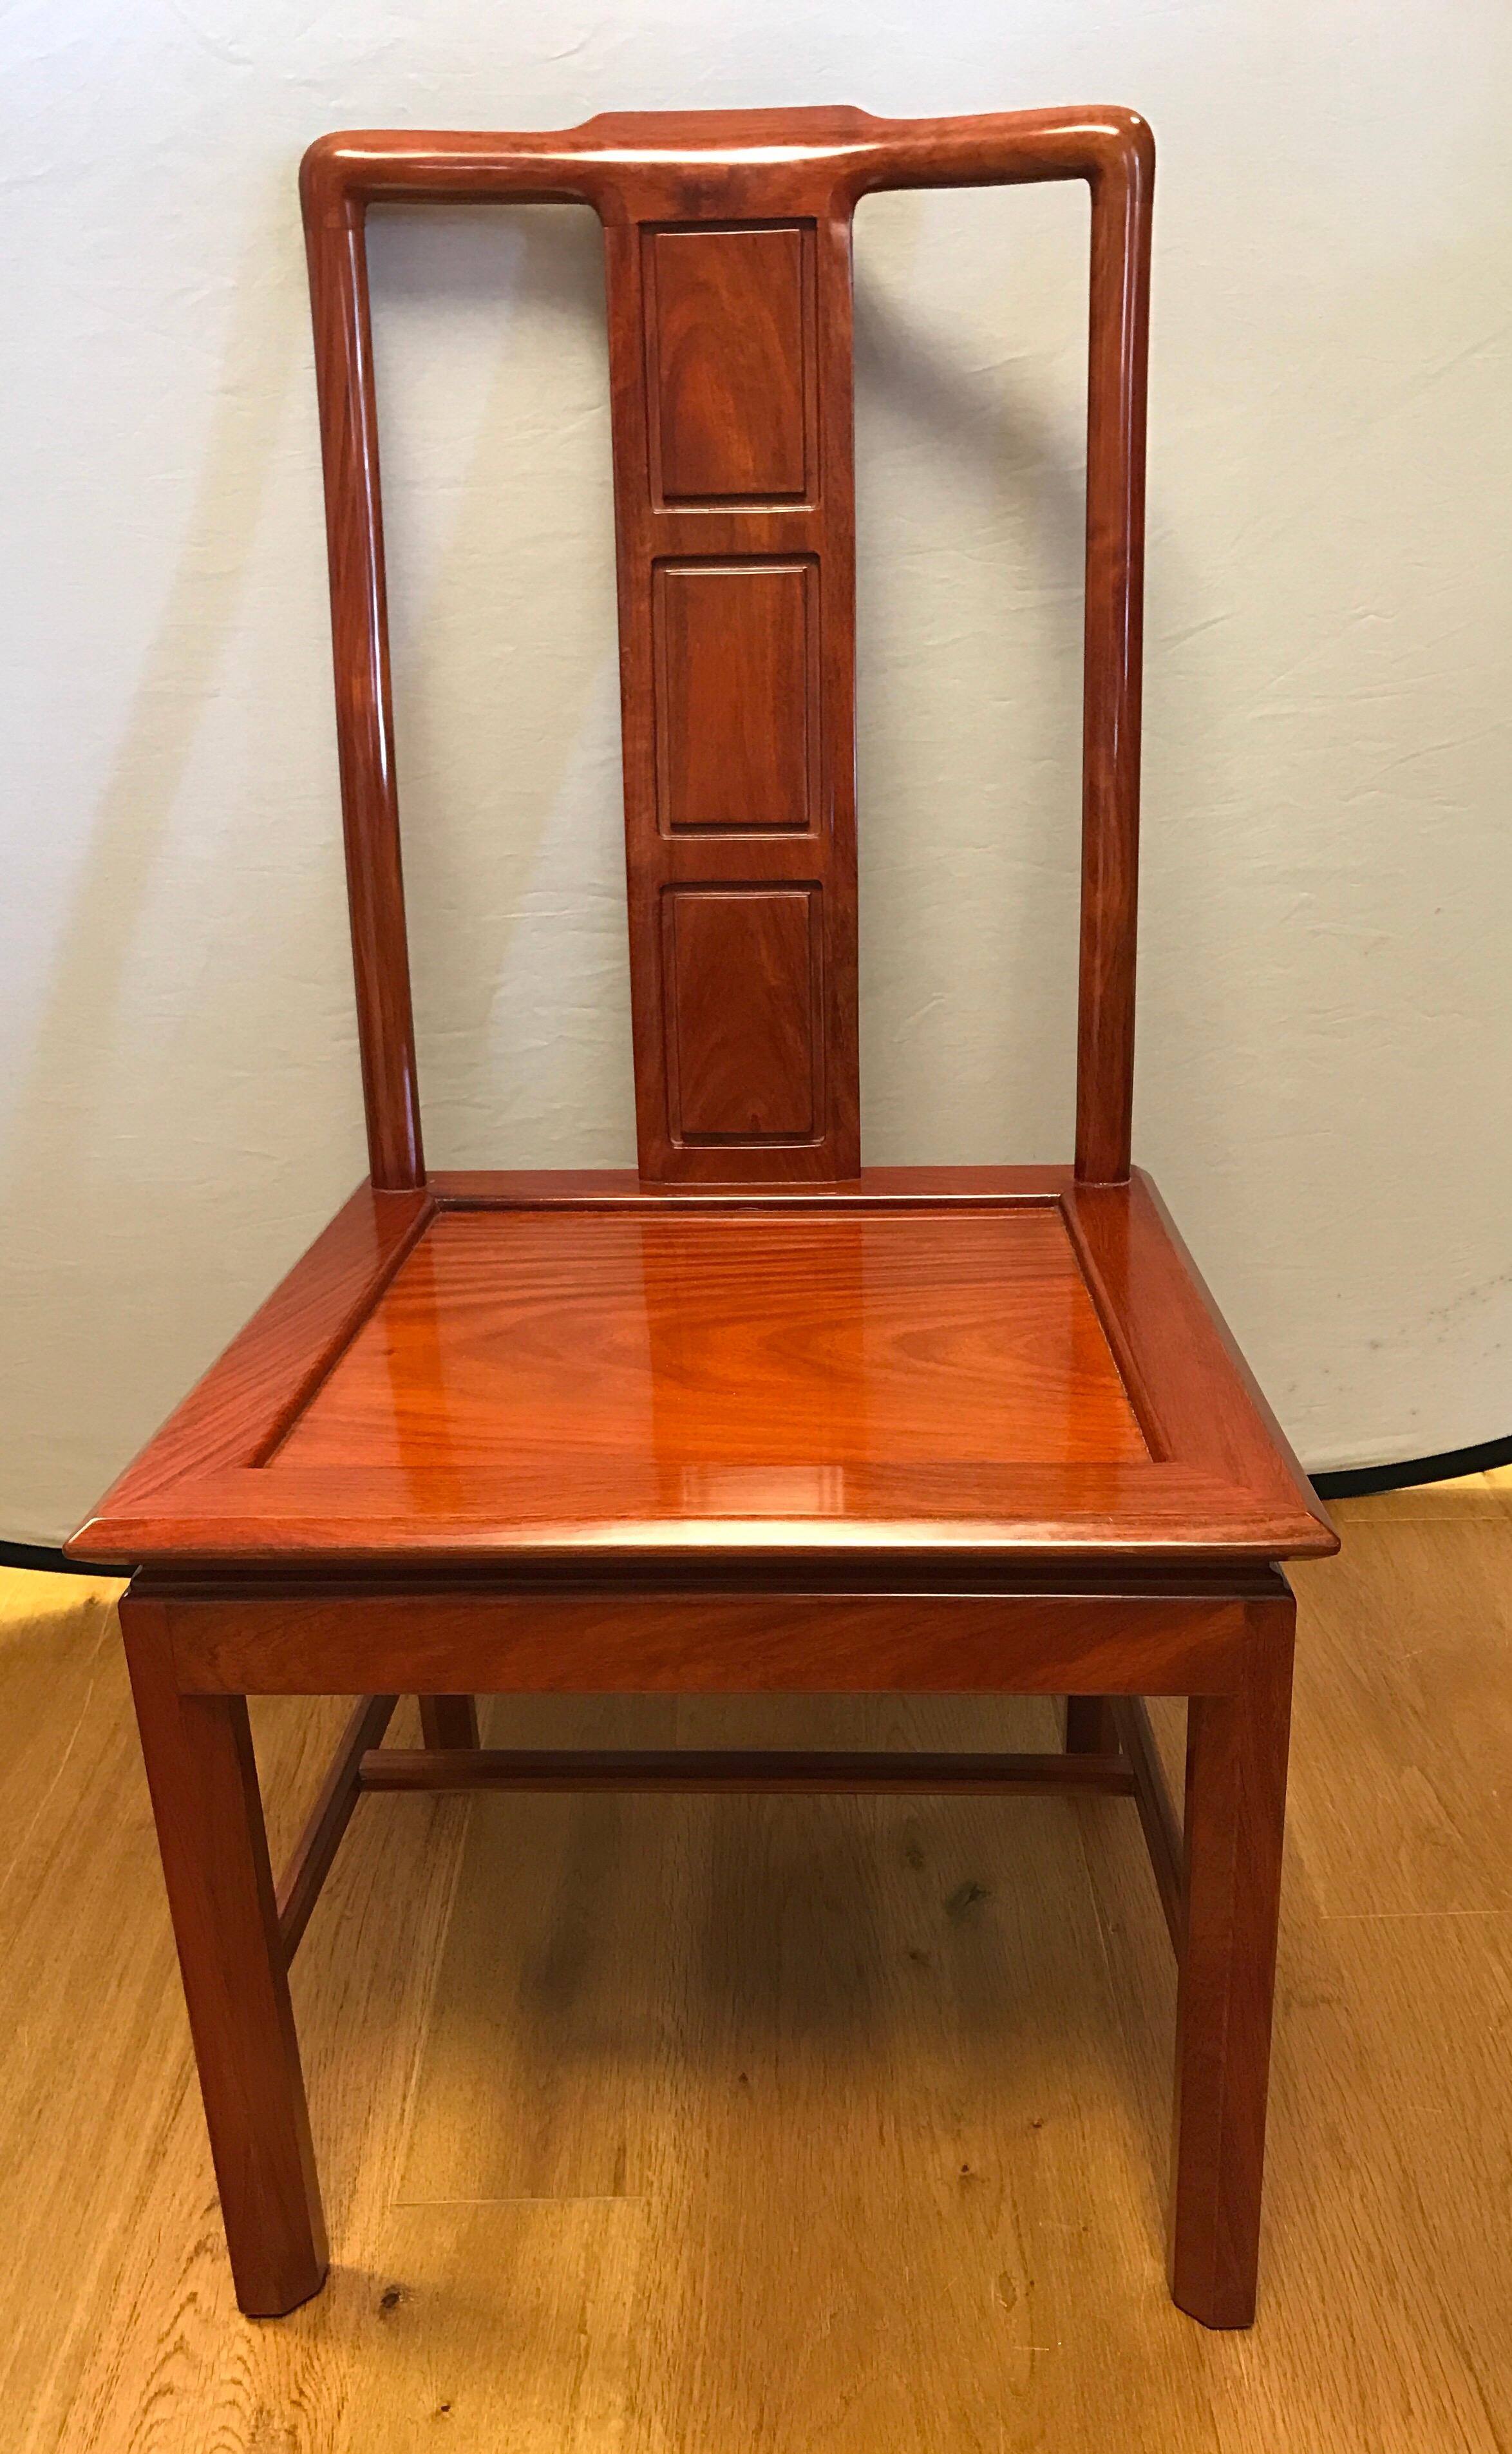 Magnificent set of eight Chinese brown rosewood chairs, of which two are armchairs and six are side chairs. Mint condition.